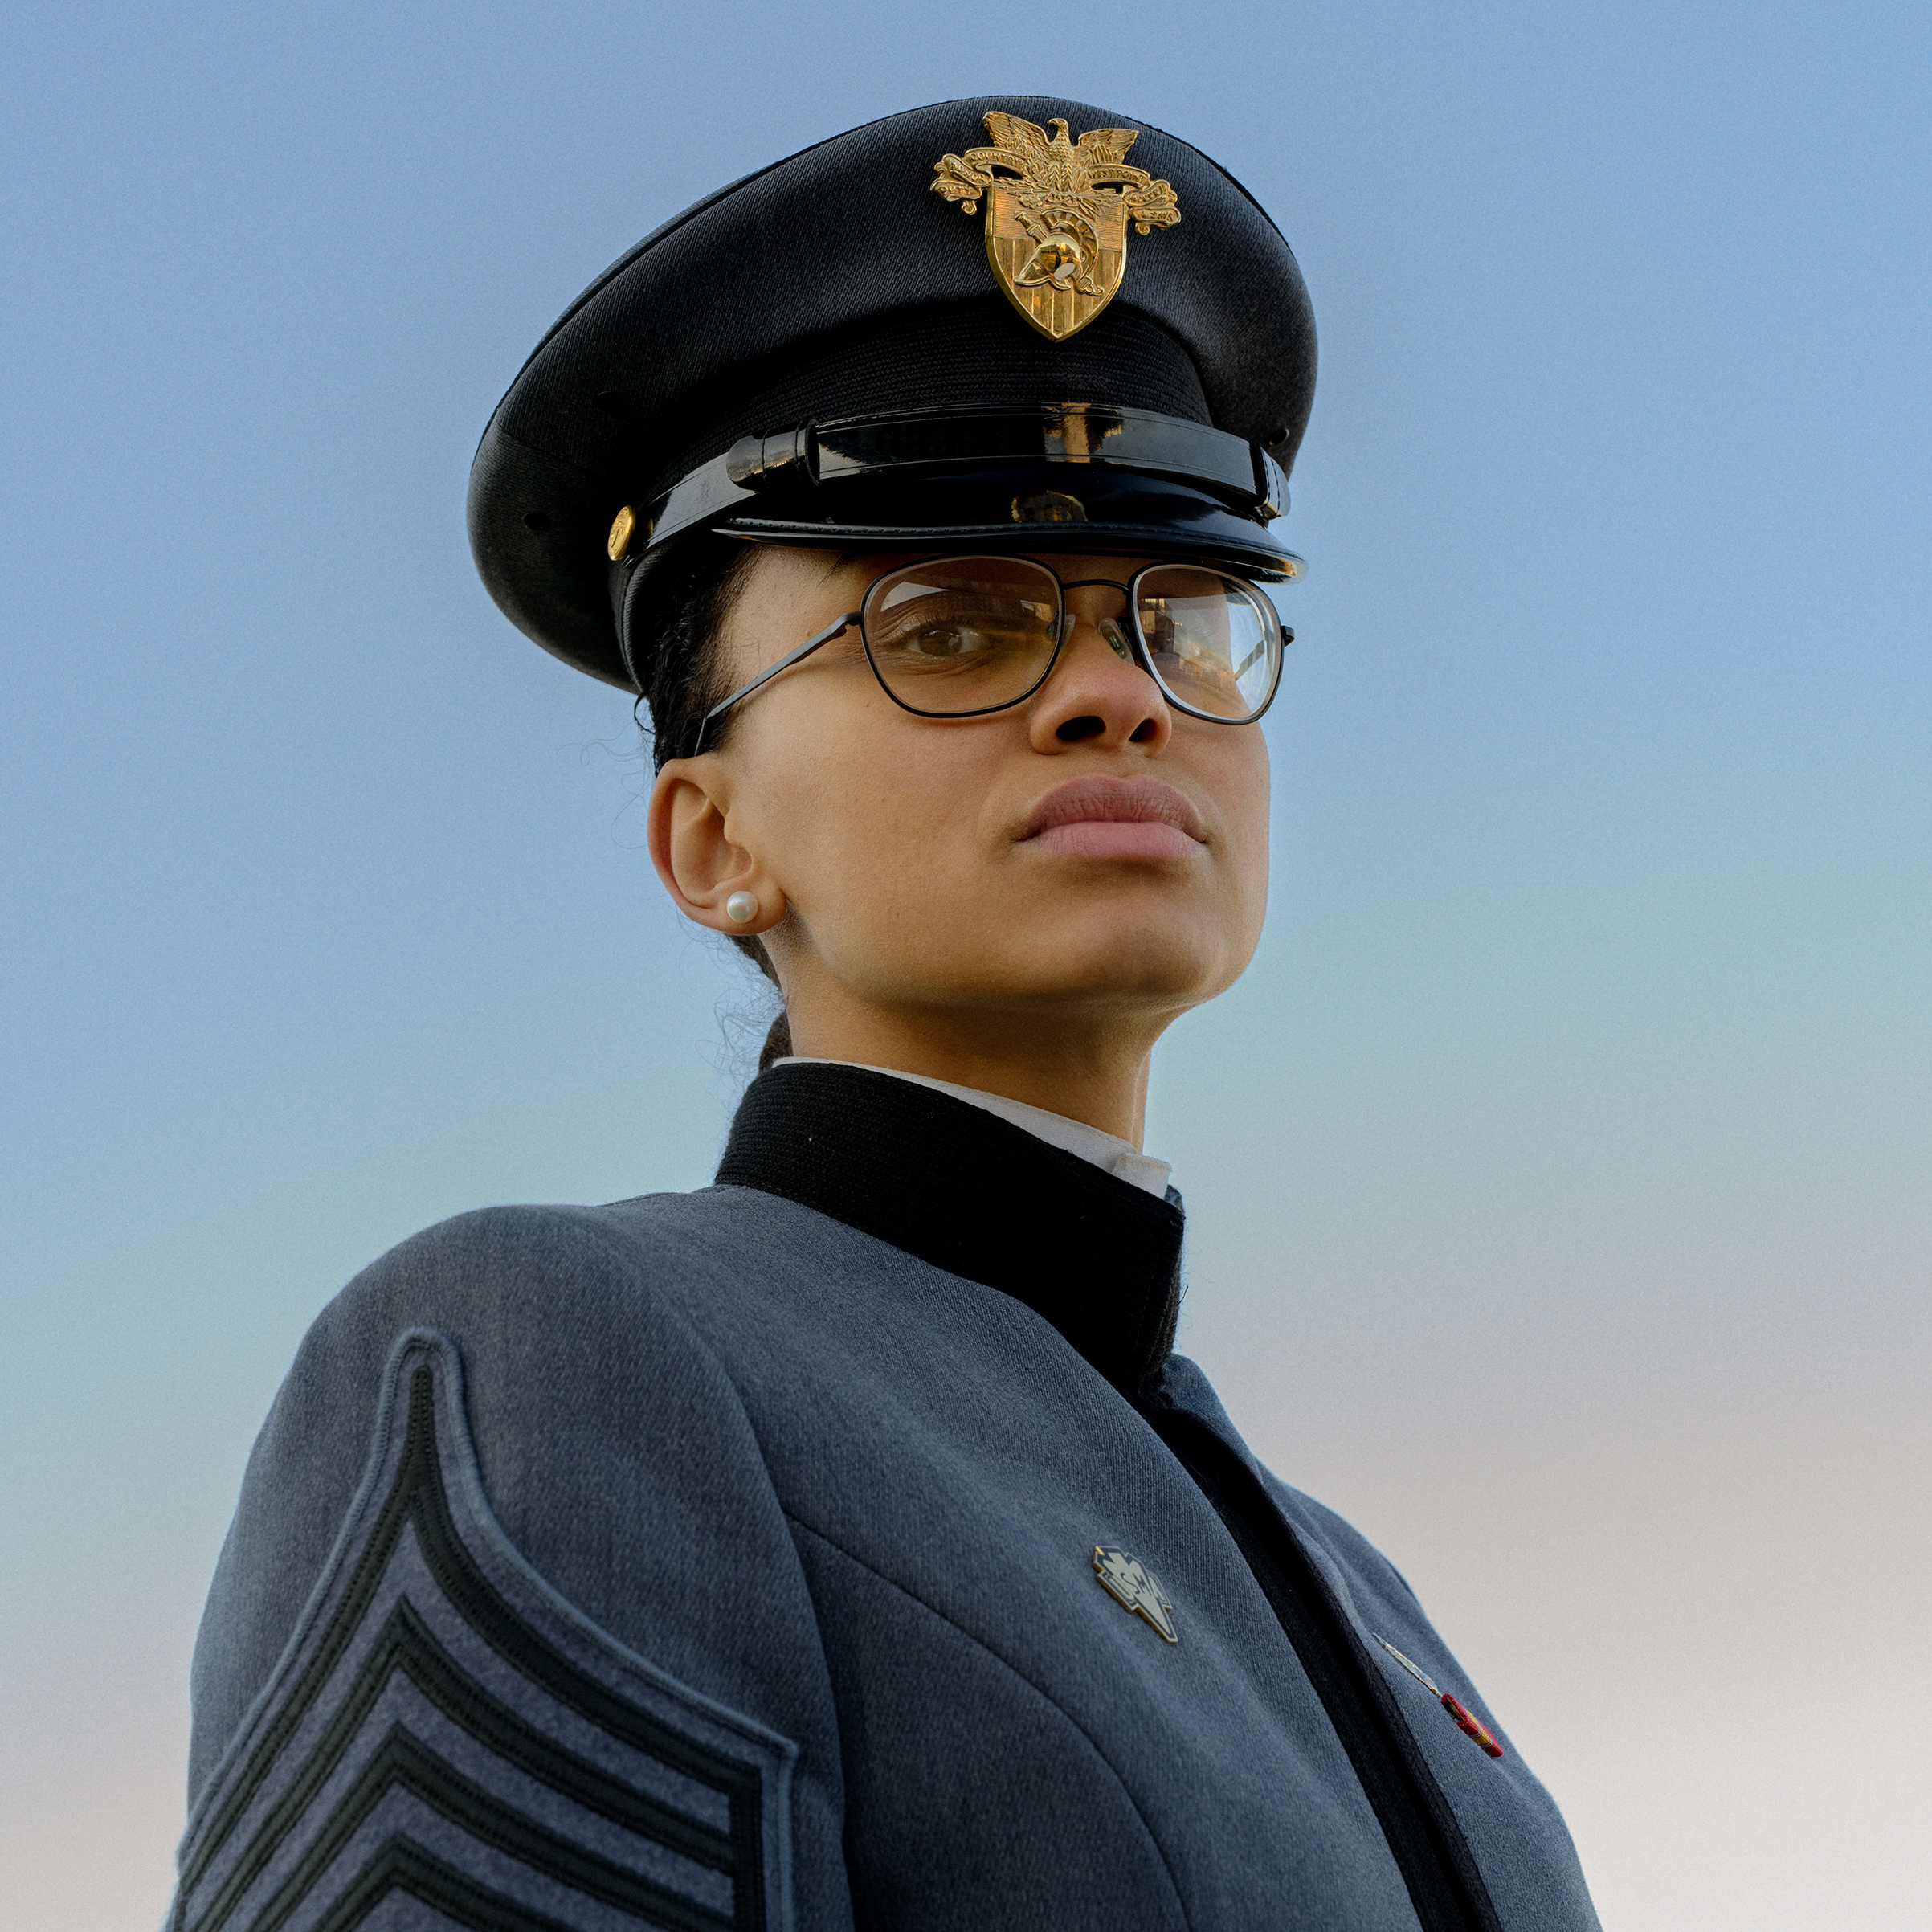 Portrait of Cadet Simone Askew, photographed at the U.S. Military Academy, in West Point, NY, Feb. 6, 2018.